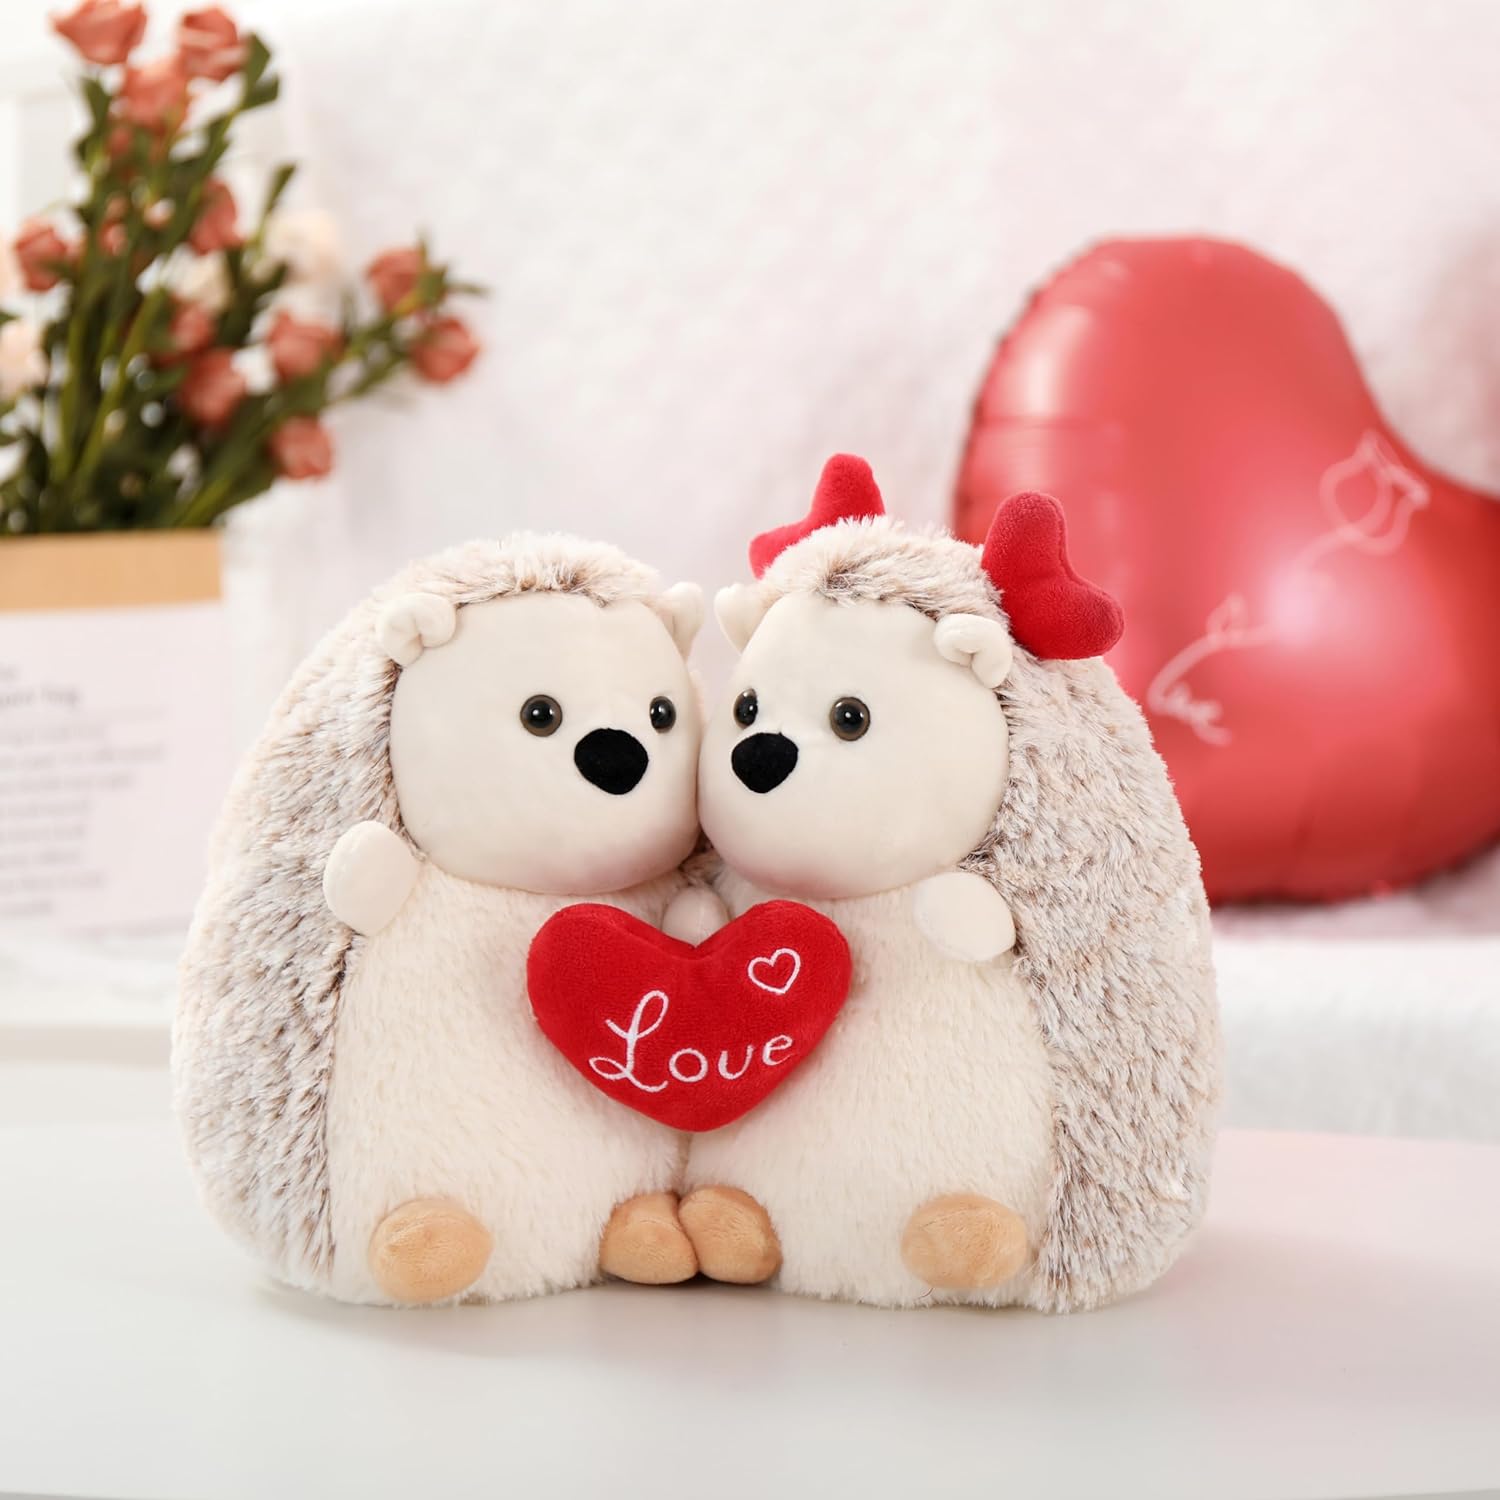 Adorable Hedgehog Plush Toy, 12 Inches